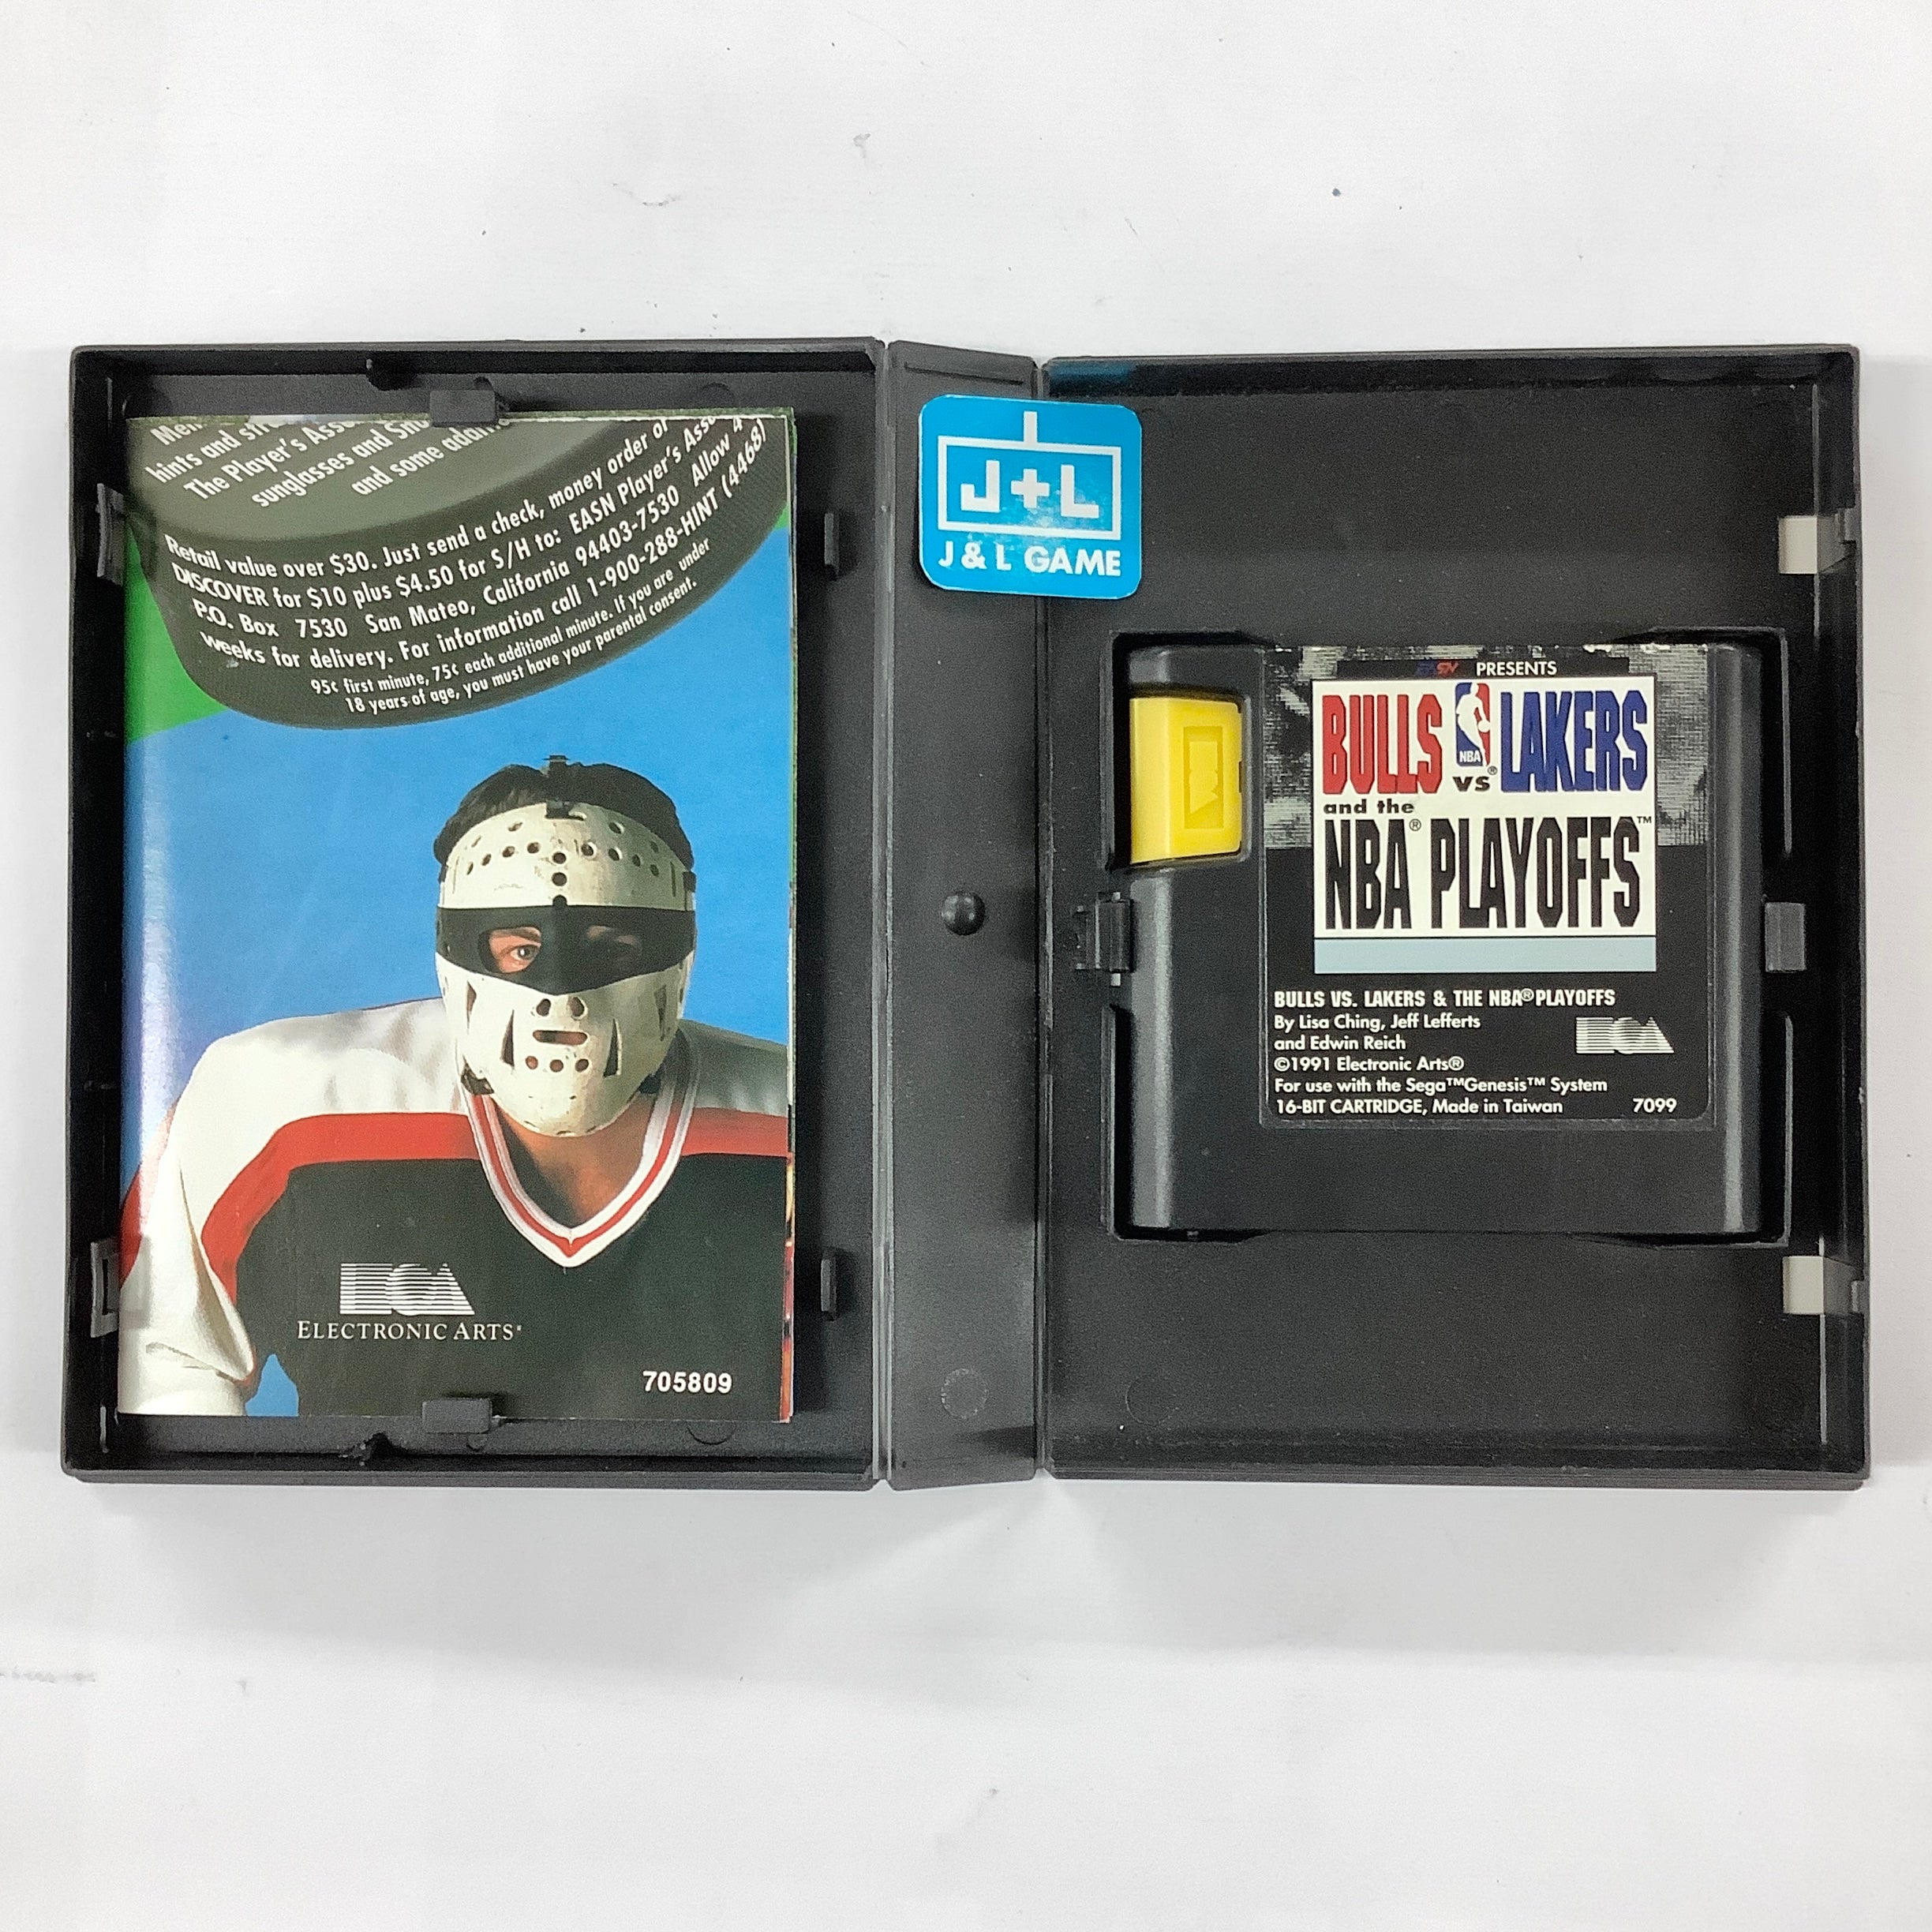 Bulls vs Lakers and the NBA Playoffs - SEGA Genesis [Pre-Owned] Video Games Electronic Arts   